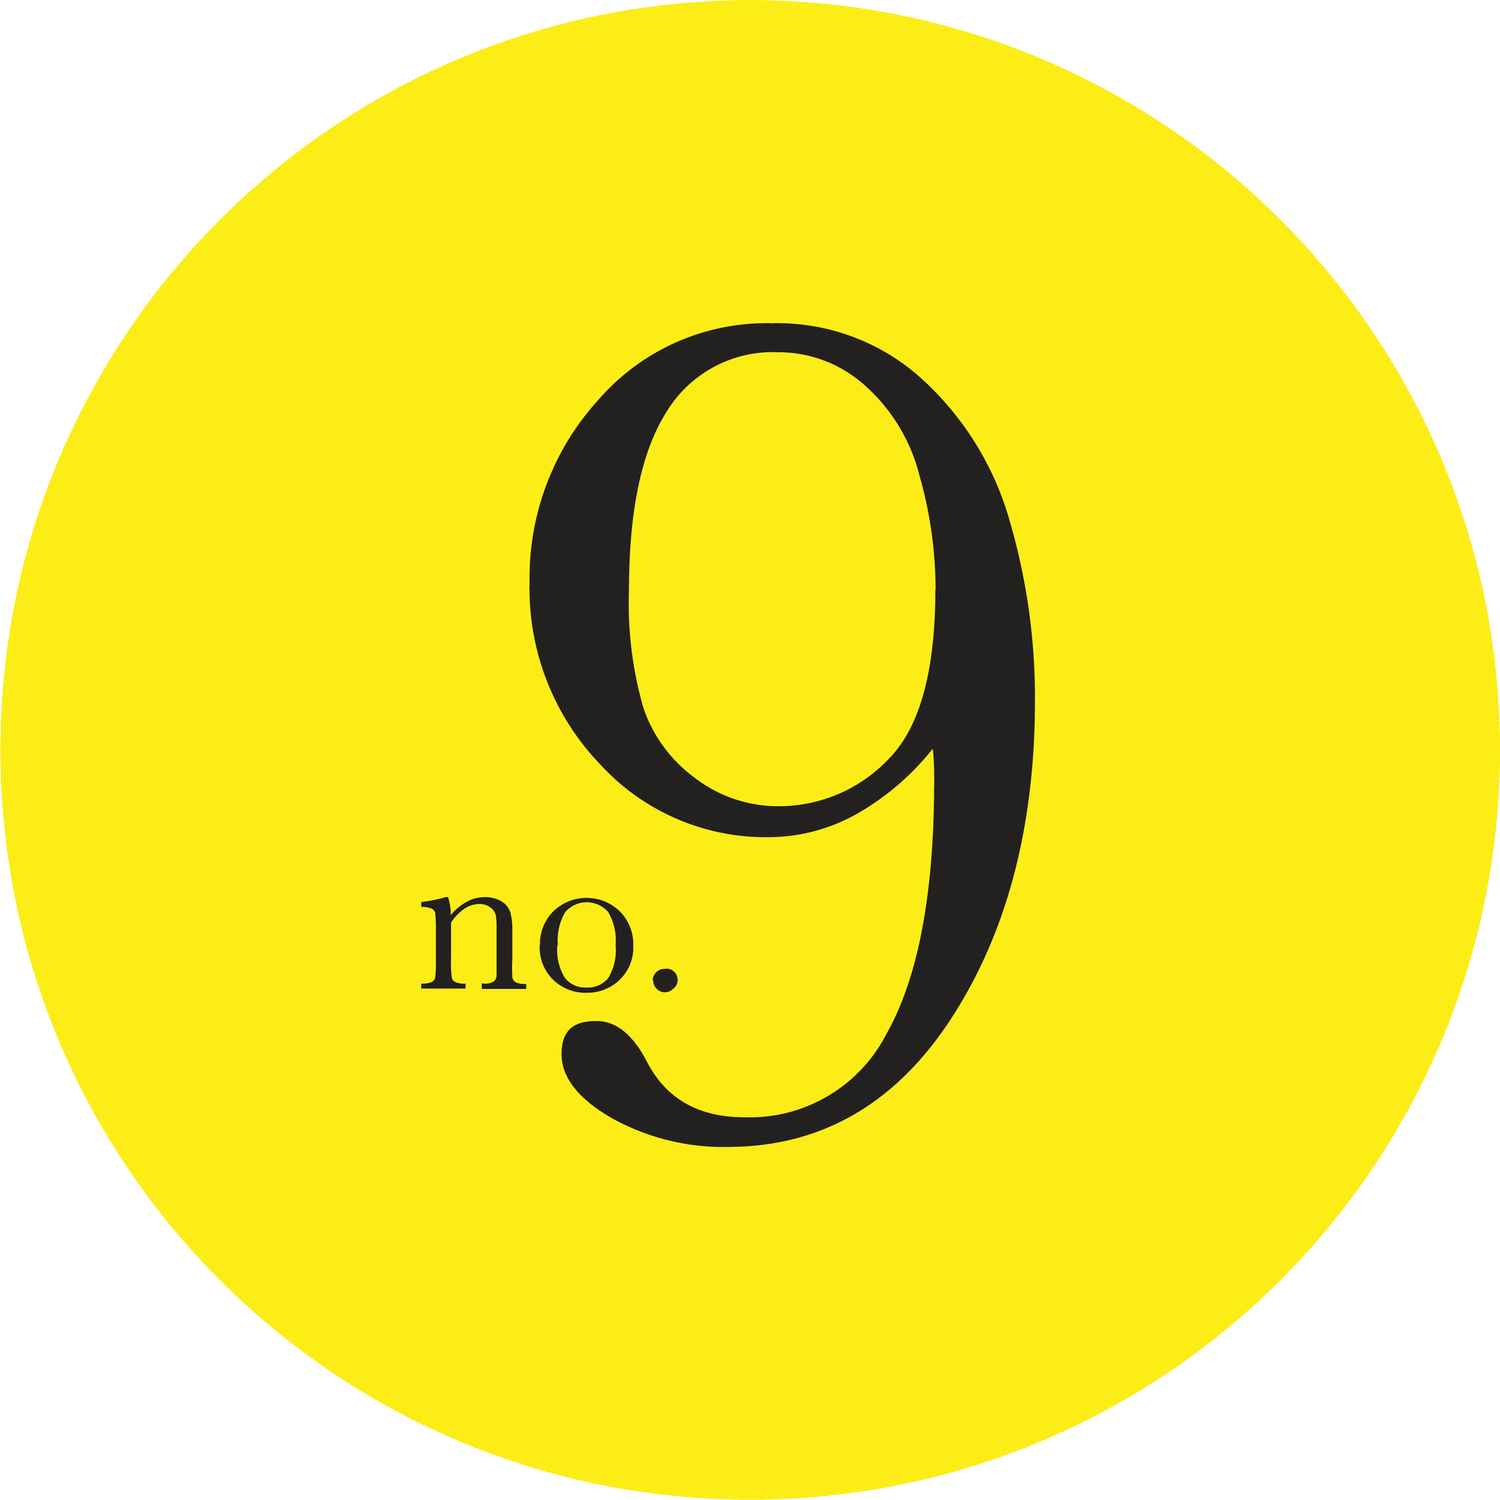 The No.9 Logo is a bright yellow circle with a black no. 9 in the middle